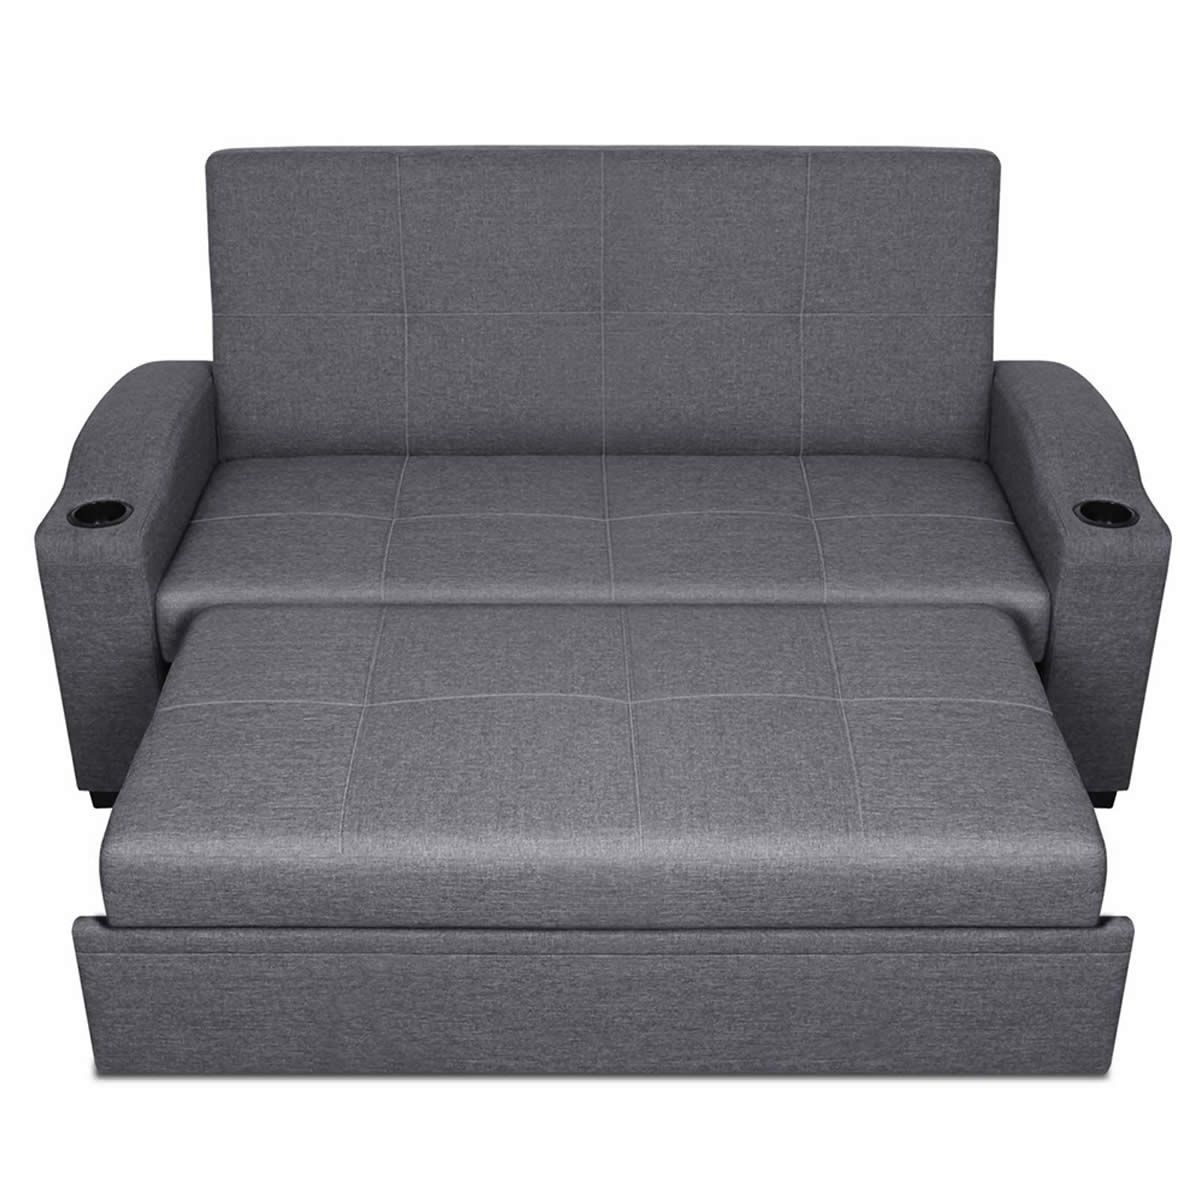 3 Seater Pull Out Sofa Bed Lounge Couch – Grey | Crazy Sales With 3 In 1 Gray Pull Out Sleeper Sofas (Gallery 20 of 20)